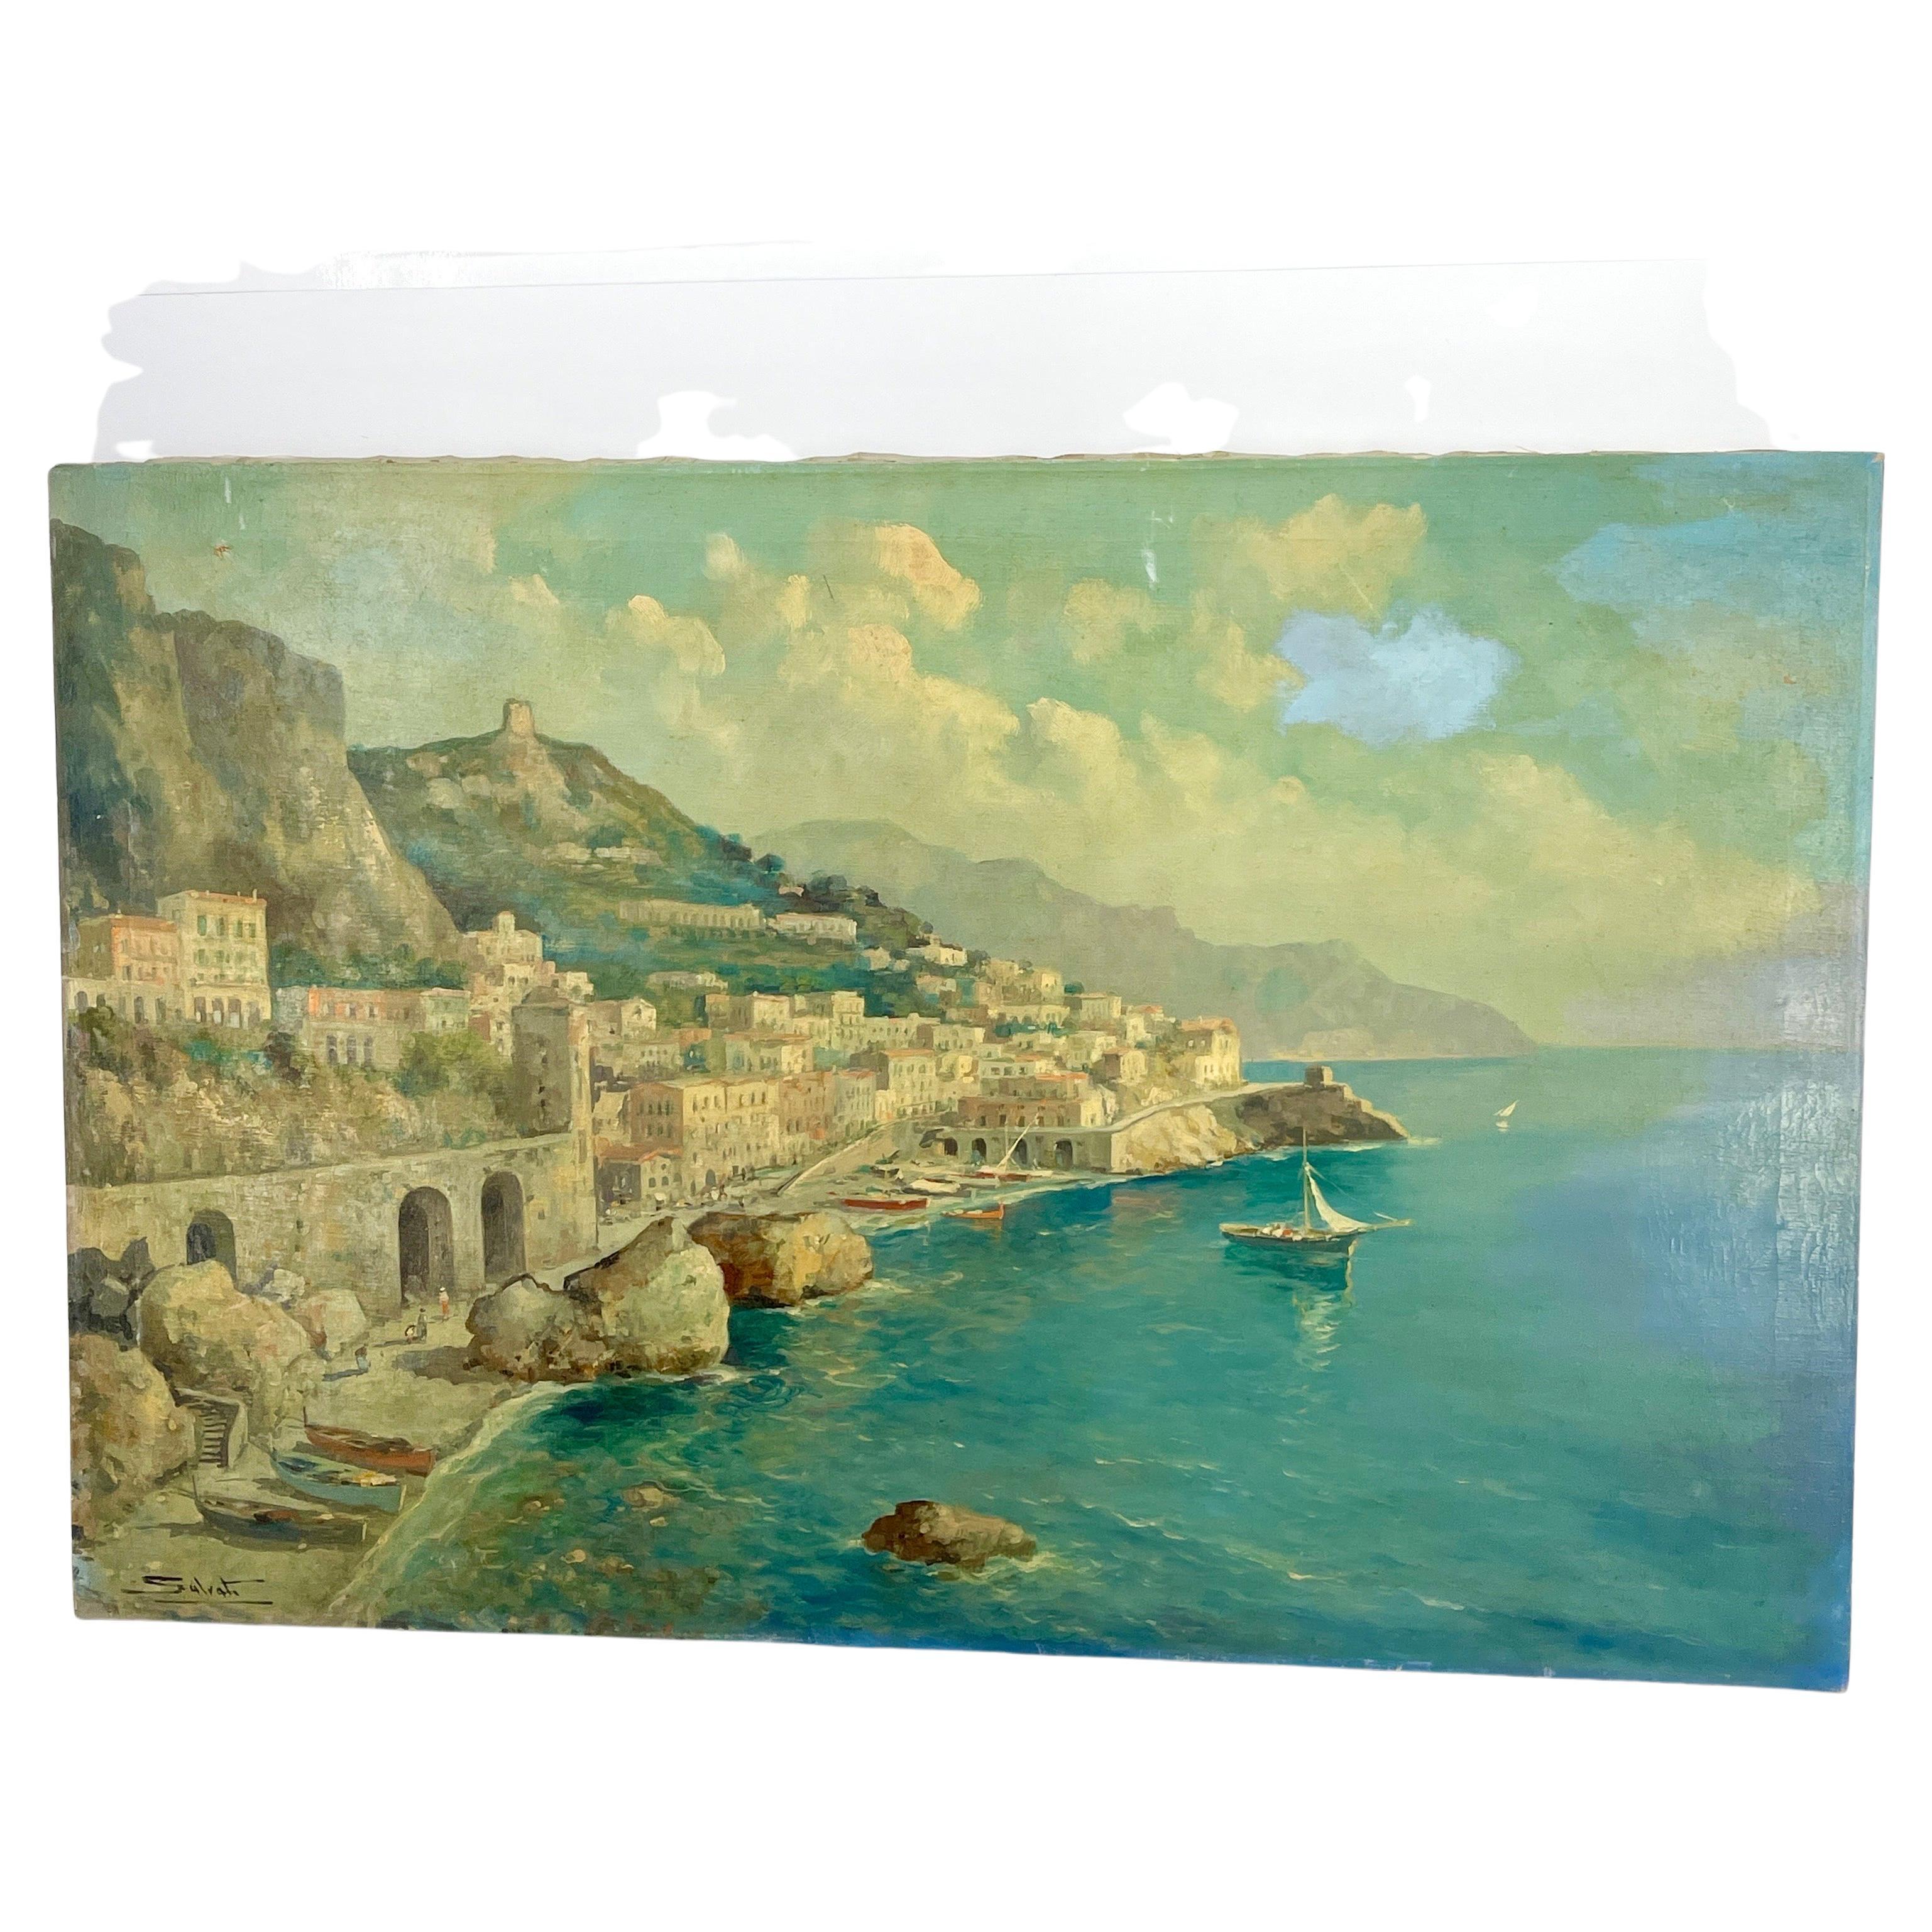 Charming oil on canvas painting of an Italian coastal city scene with sail boats, signed, circa 1950's.   
A very lifelike rendering of an Italian coastline. This 20th Century oil painting features mountains, buildings, beach and fishing boats.